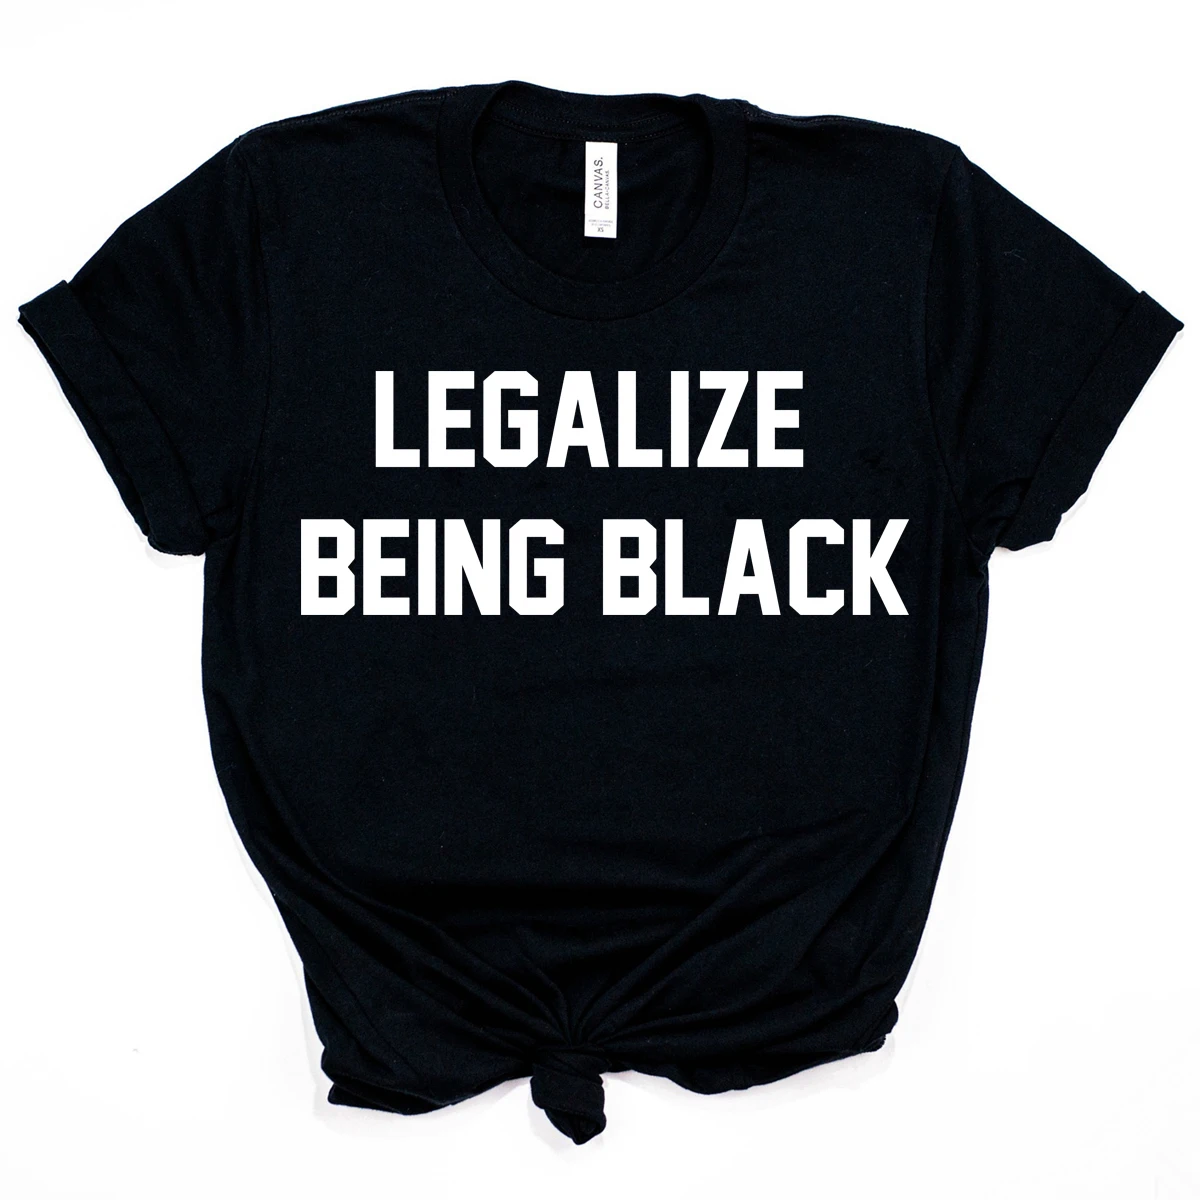 

2020 Legalize Being Black T-shirt Stay Woke Black History Shirt Unsex Black Lives Matter Activist Tees Race Equality Tops